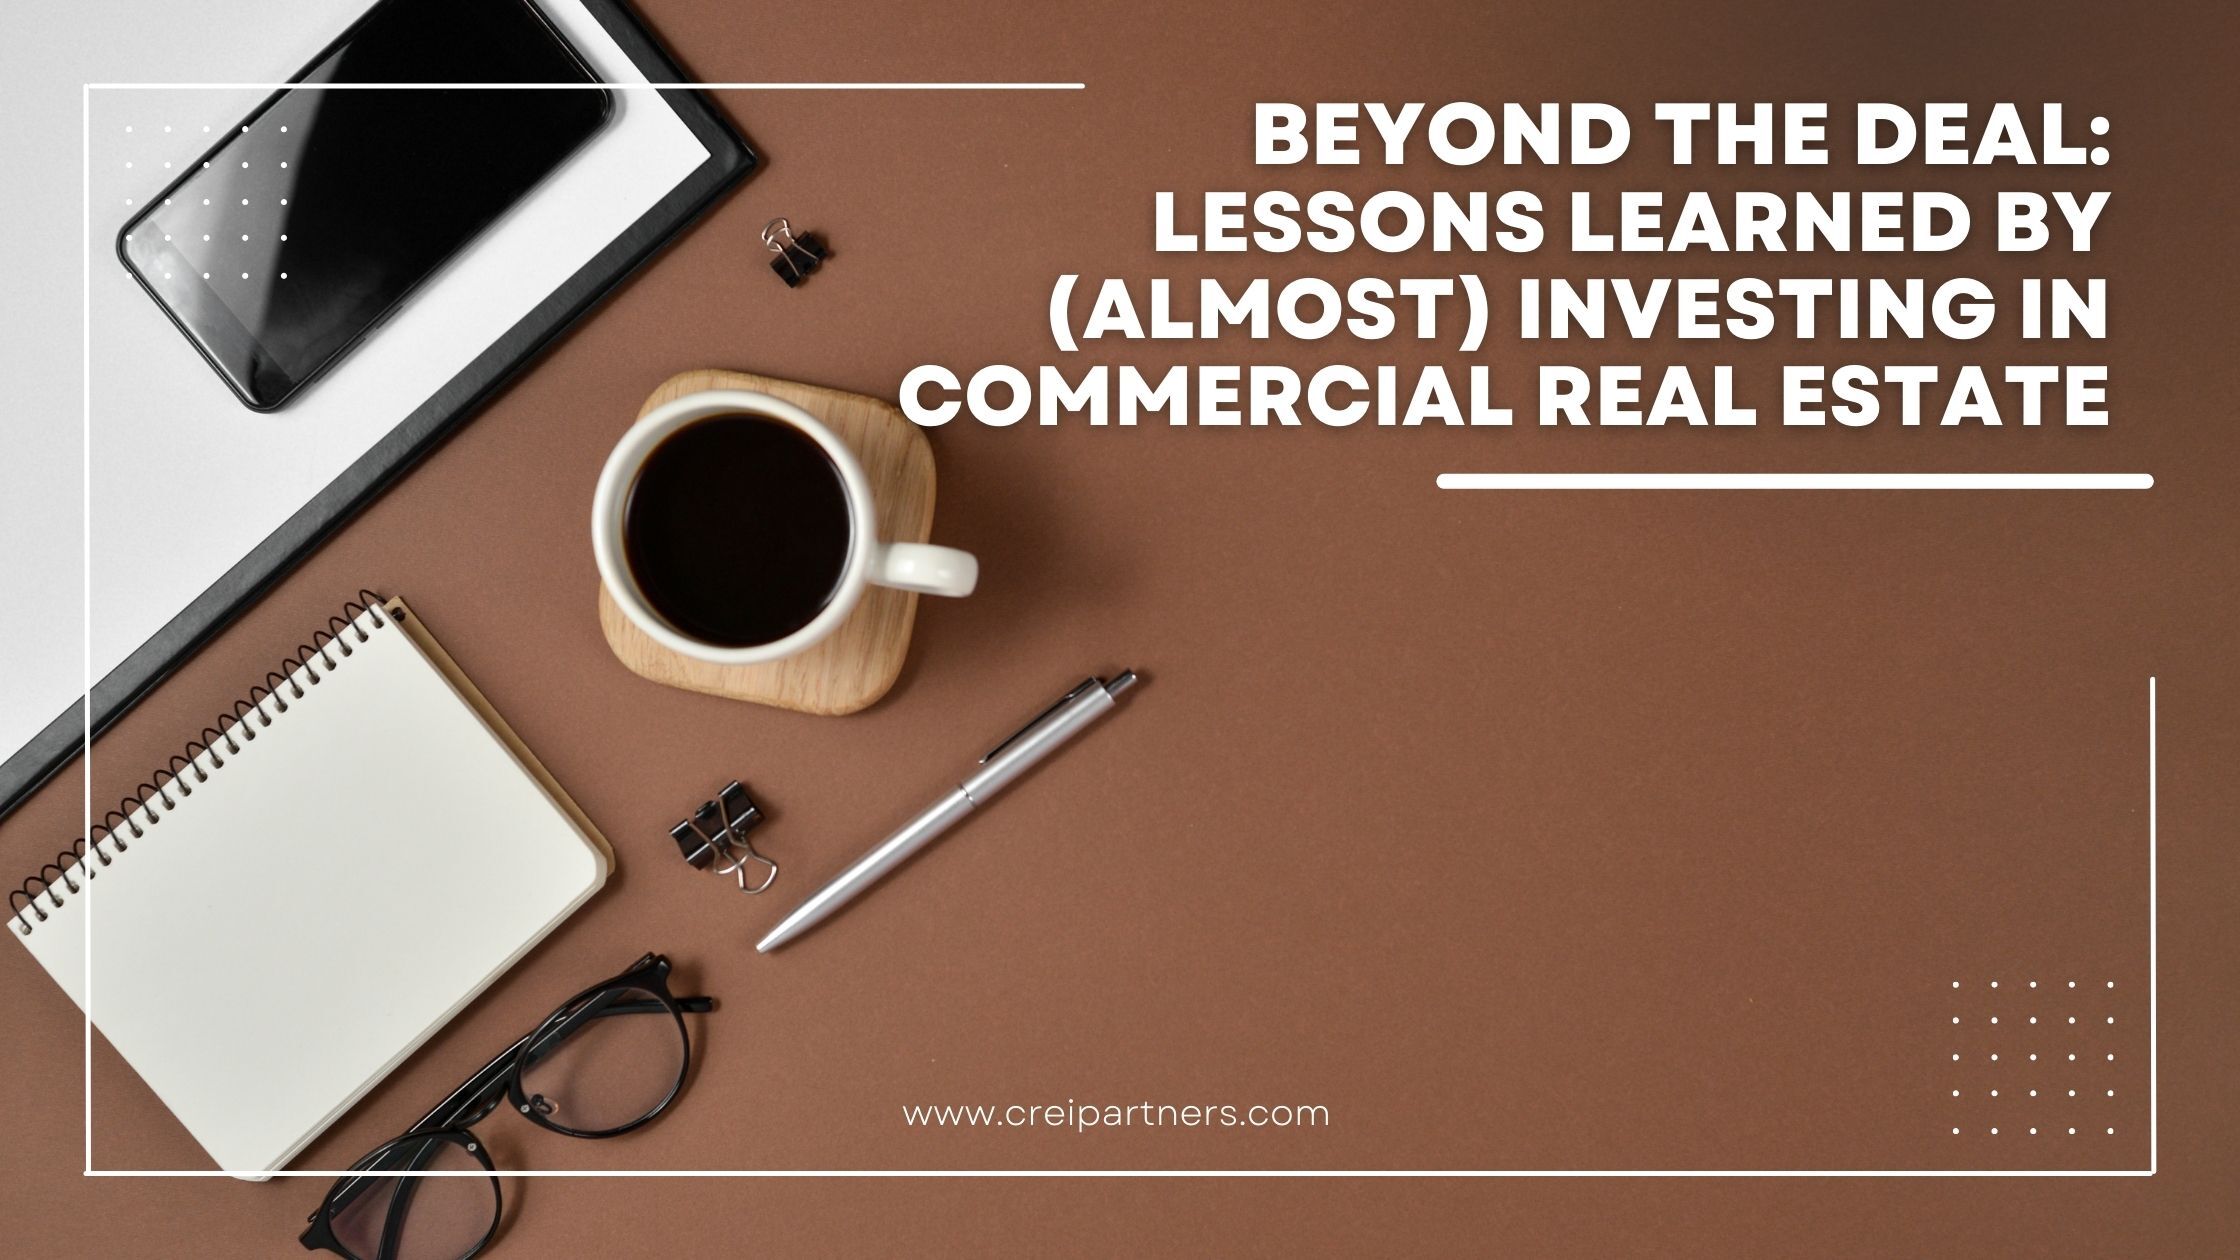 Beyond the Deal: Lessons Learned by (Almost) Investing in Commercial Real Estate